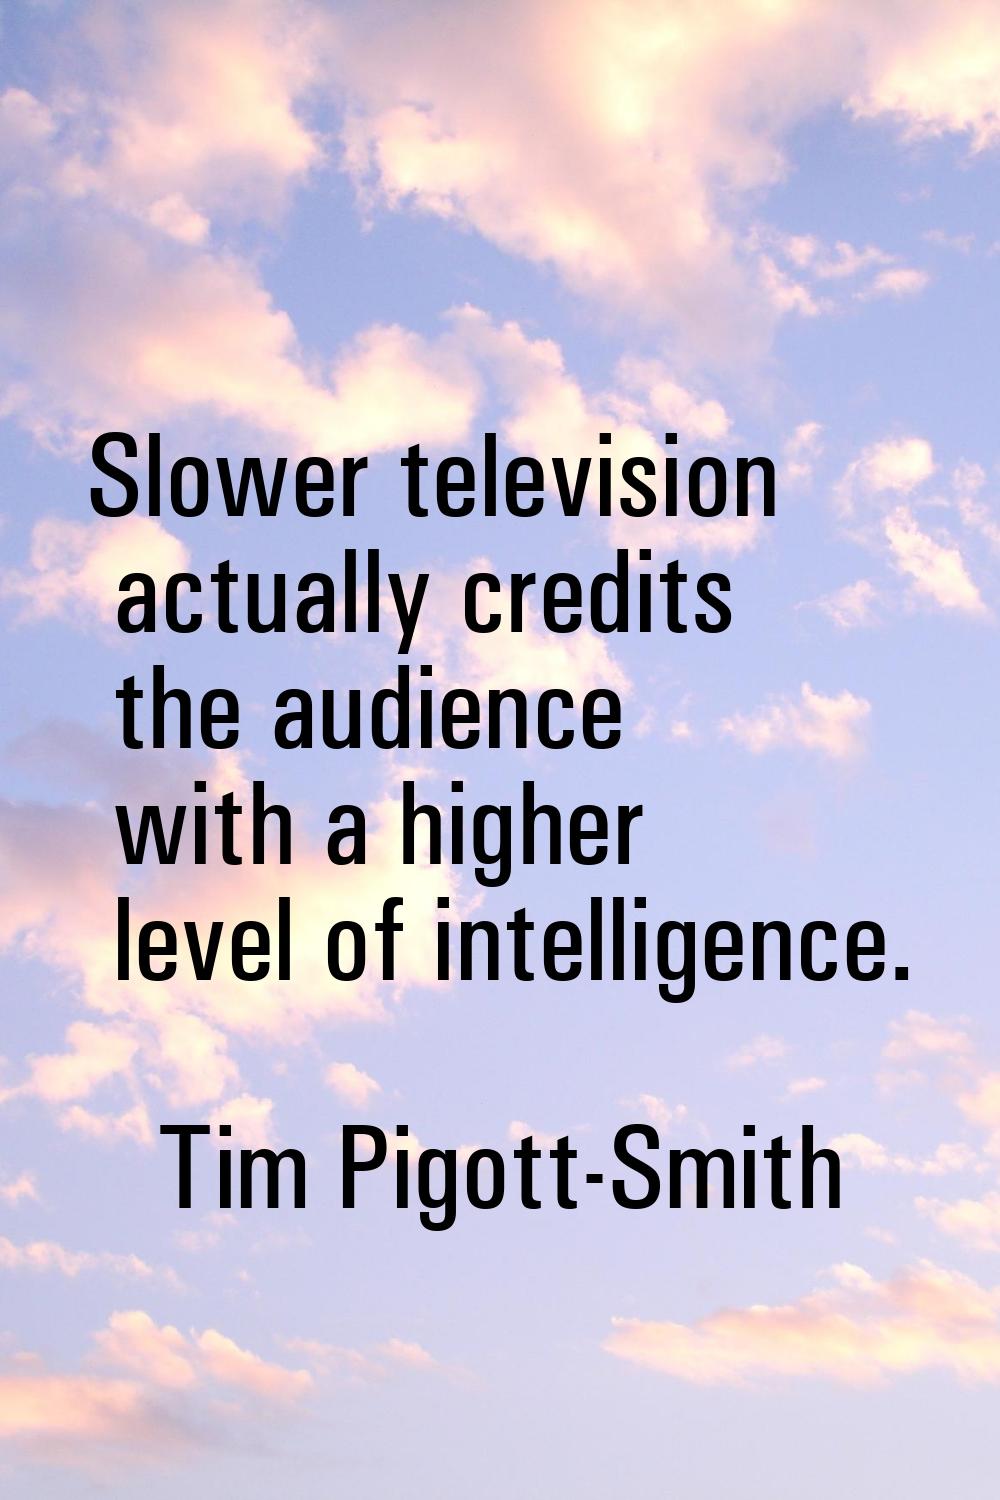 Slower television actually credits the audience with a higher level of intelligence.